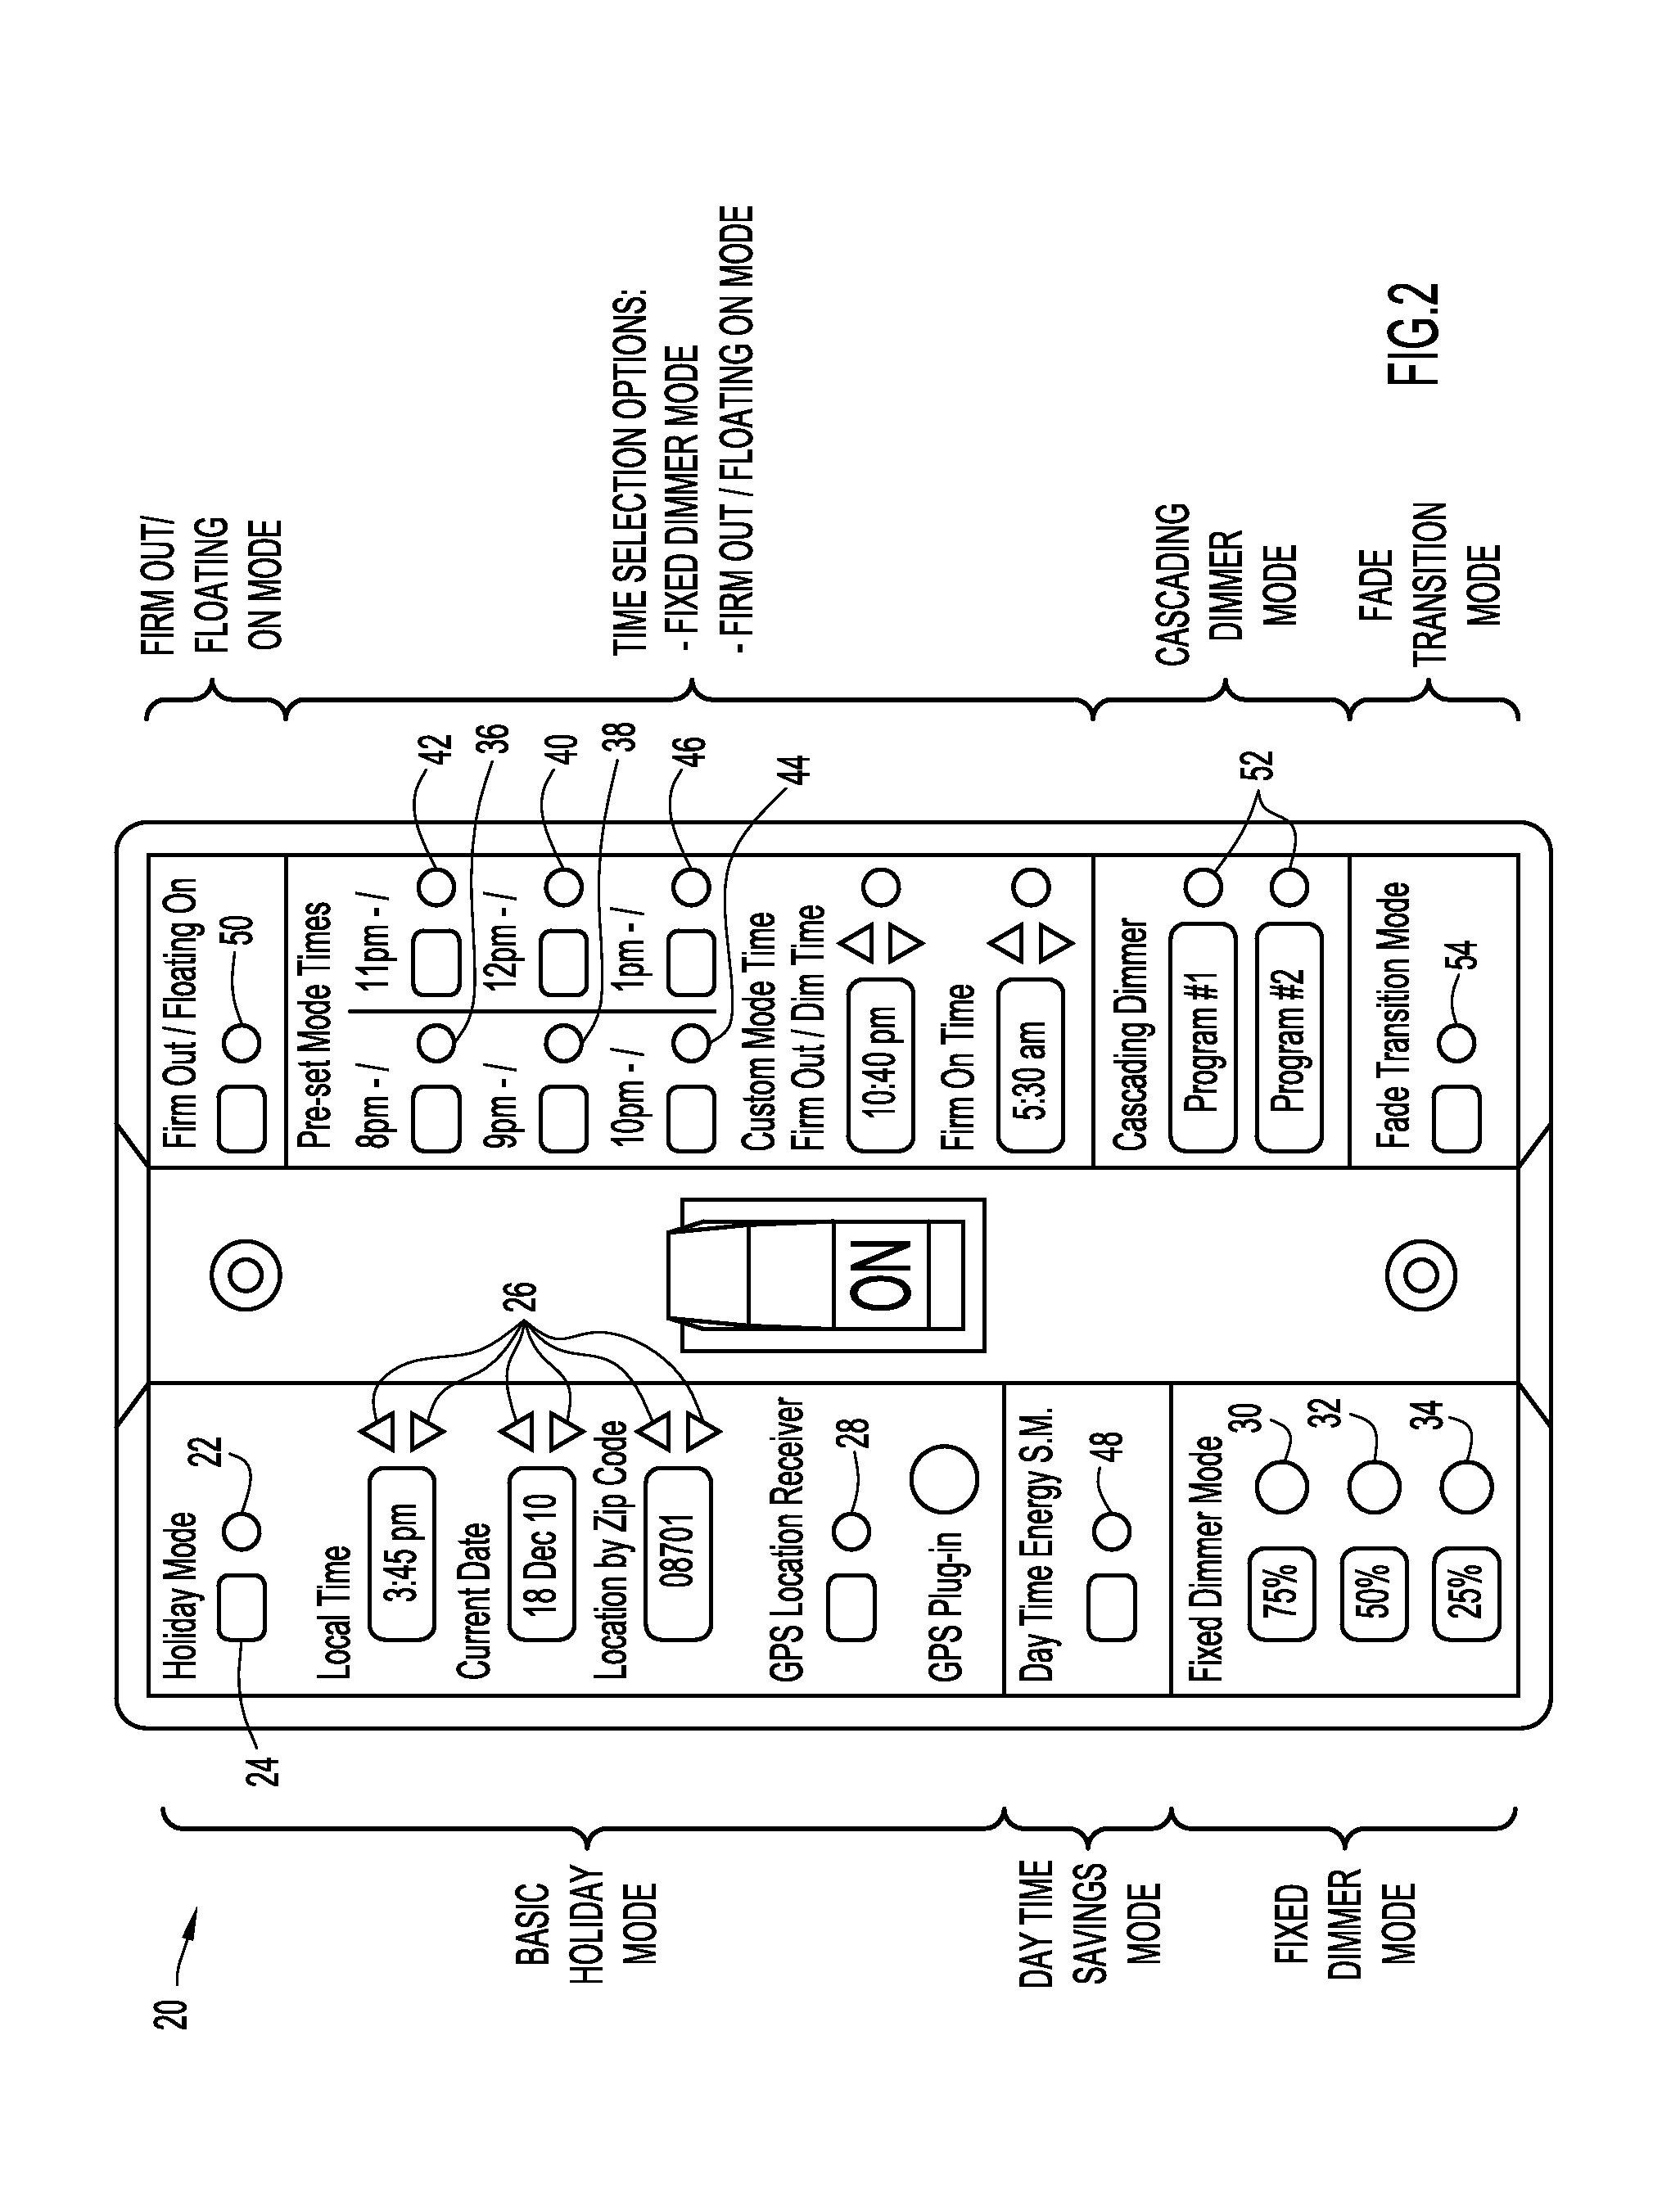 Method and apparatus for controlling operations and signaling at times dependent on clock, calendar and geographic location